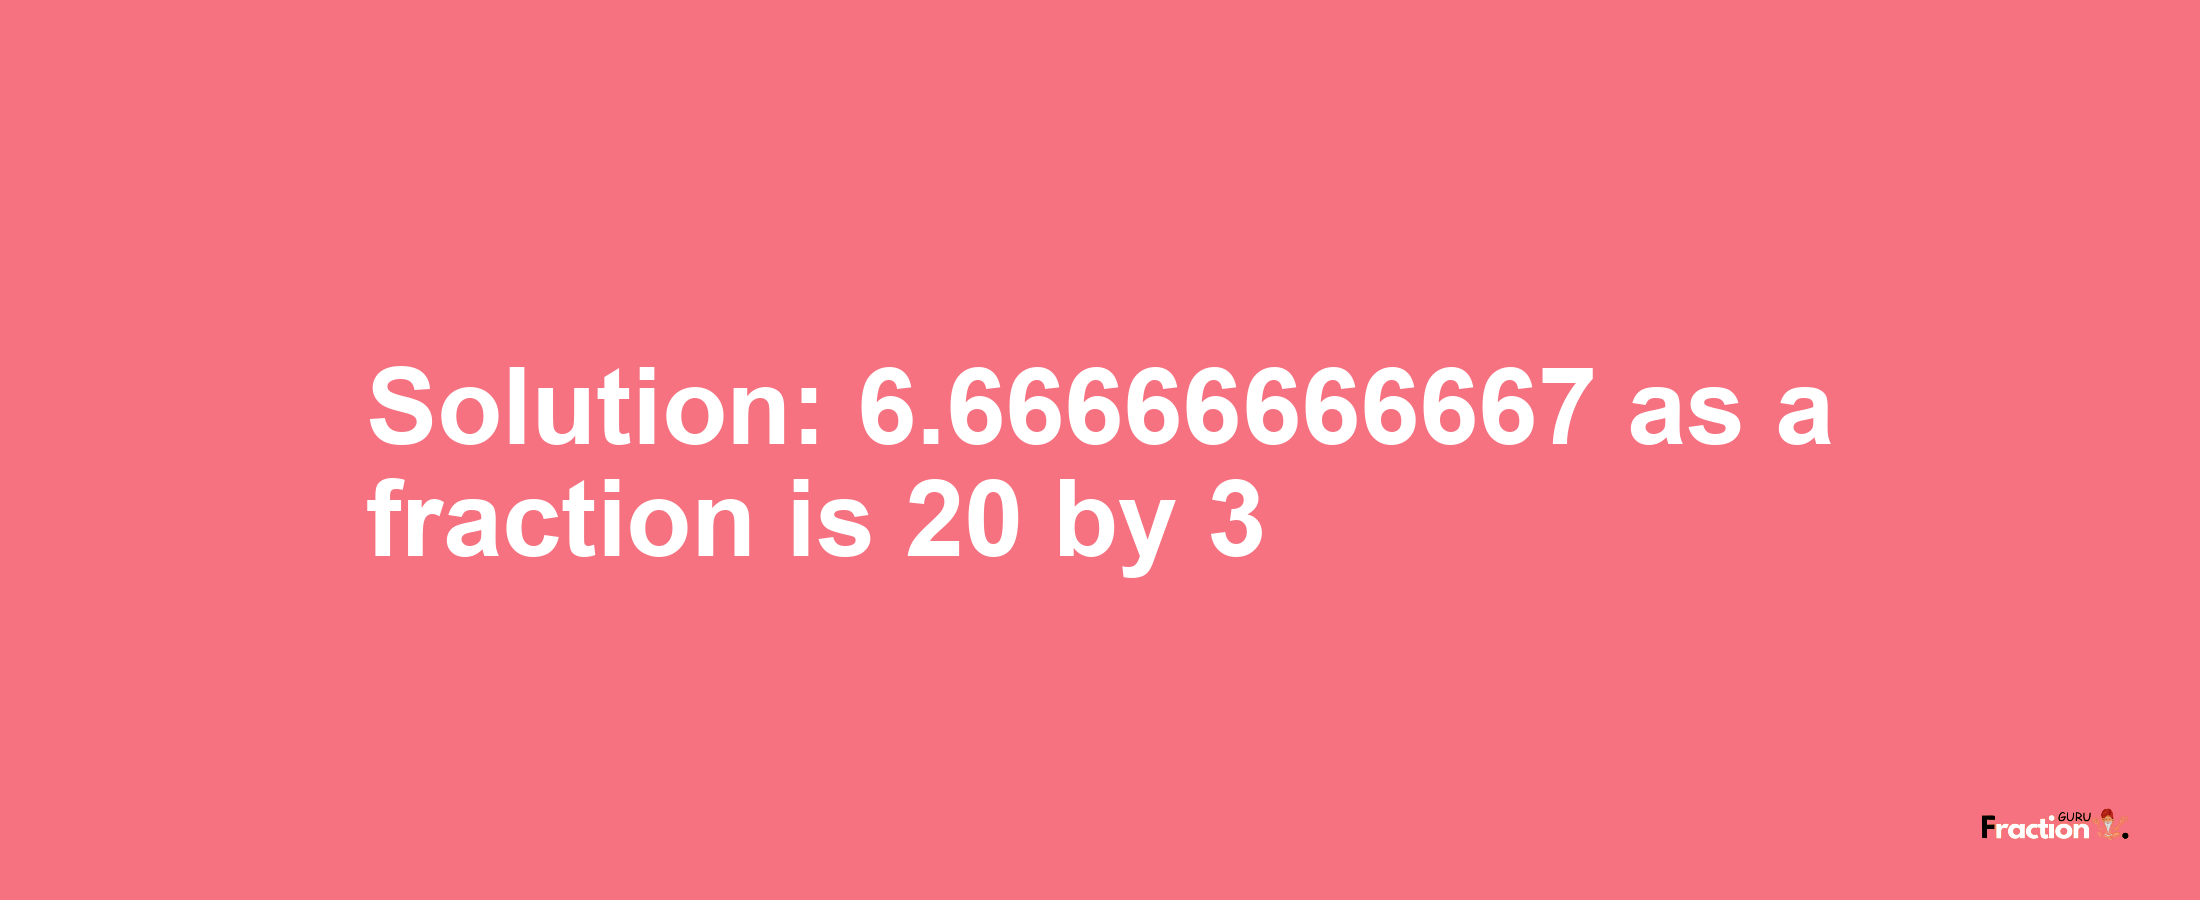 Solution:6.66666666667 as a fraction is 20/3